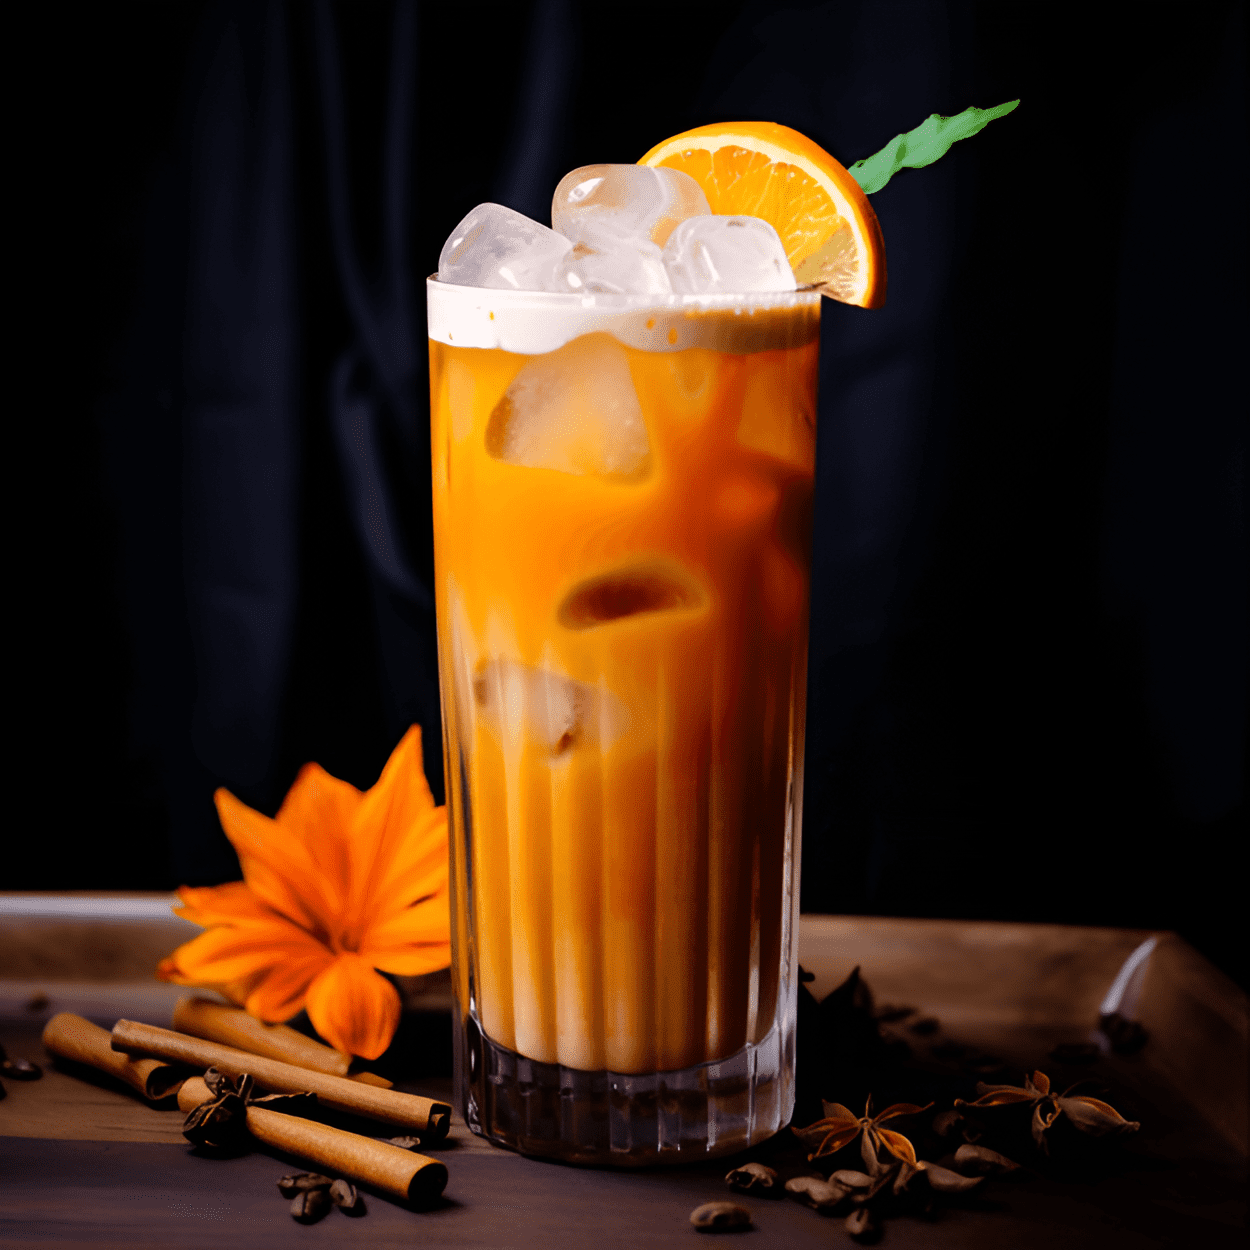 Thai Tea Cocktail Recipe - This Thai Tea cocktail has a unique, sweet, and creamy taste with a hint of spiciness from the spices. The strong tea flavor is balanced by the sweetness of the condensed milk and the smoothness of the alcohol, making it a delightful and refreshing drink.